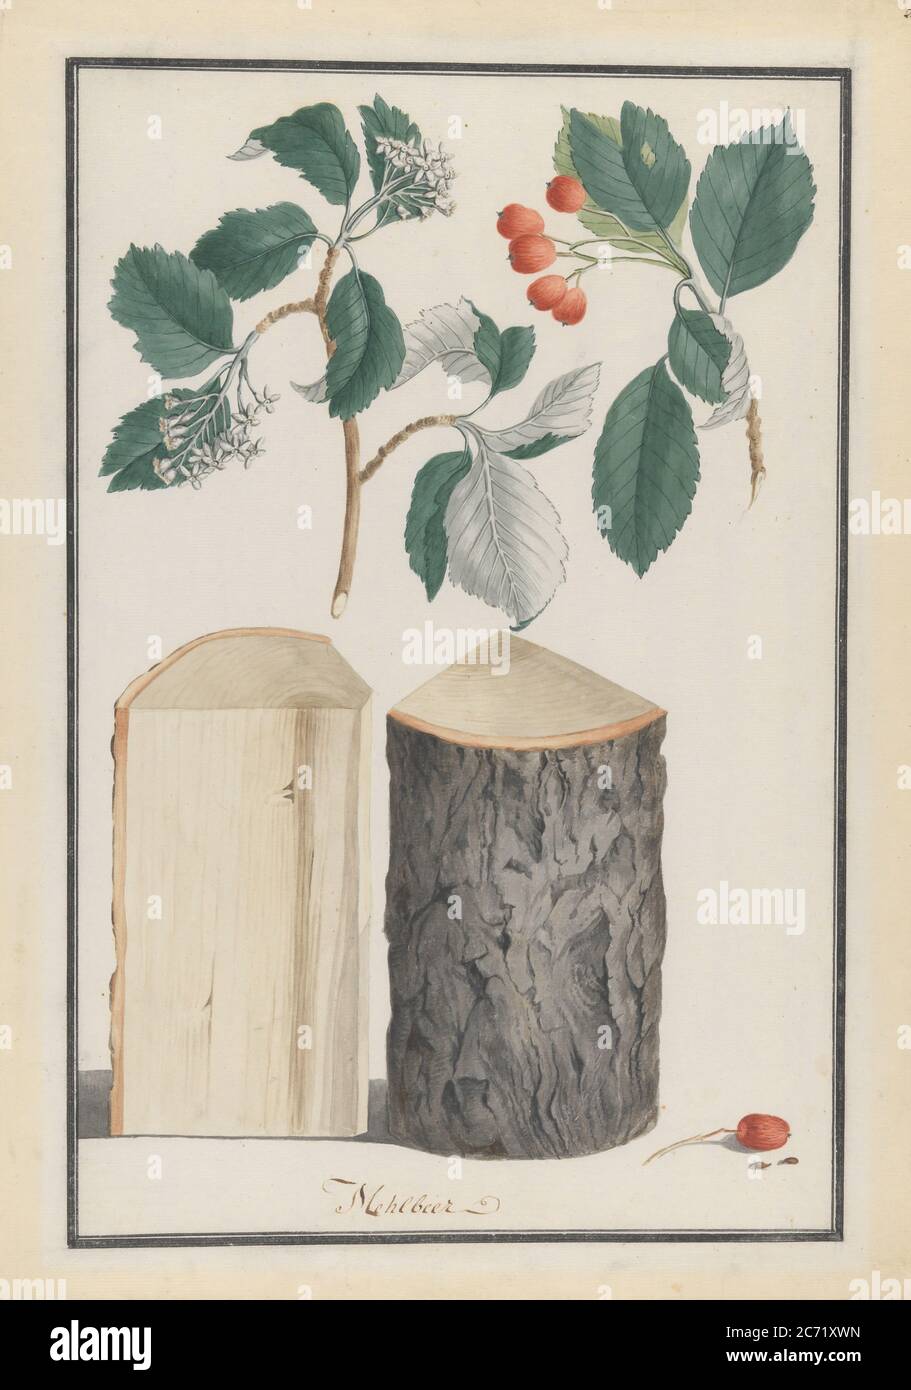 Studies of the leaves, blossoms, fruits and trunk of a whitebeam (Sorbus subgenus Aria), 1788. Stock Photo